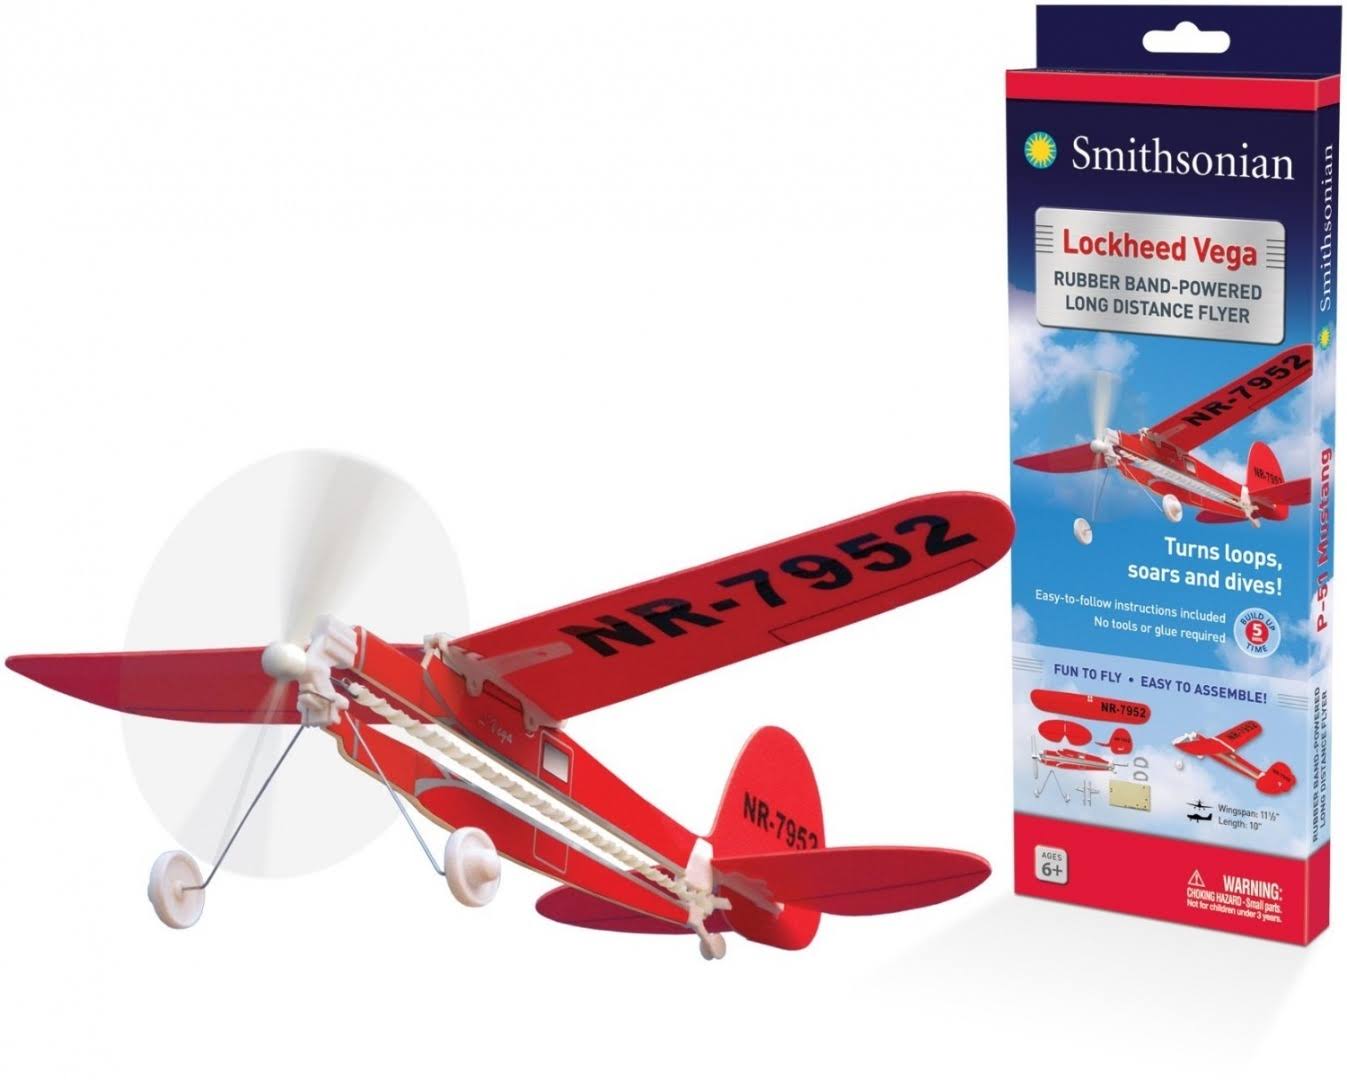 Smithsonian Lockheed Vega Flyer | Smithsonian | Collectibles | Best Price Guarantee | Free Shipping On All Orders | 30 Day Money Back Guarantee